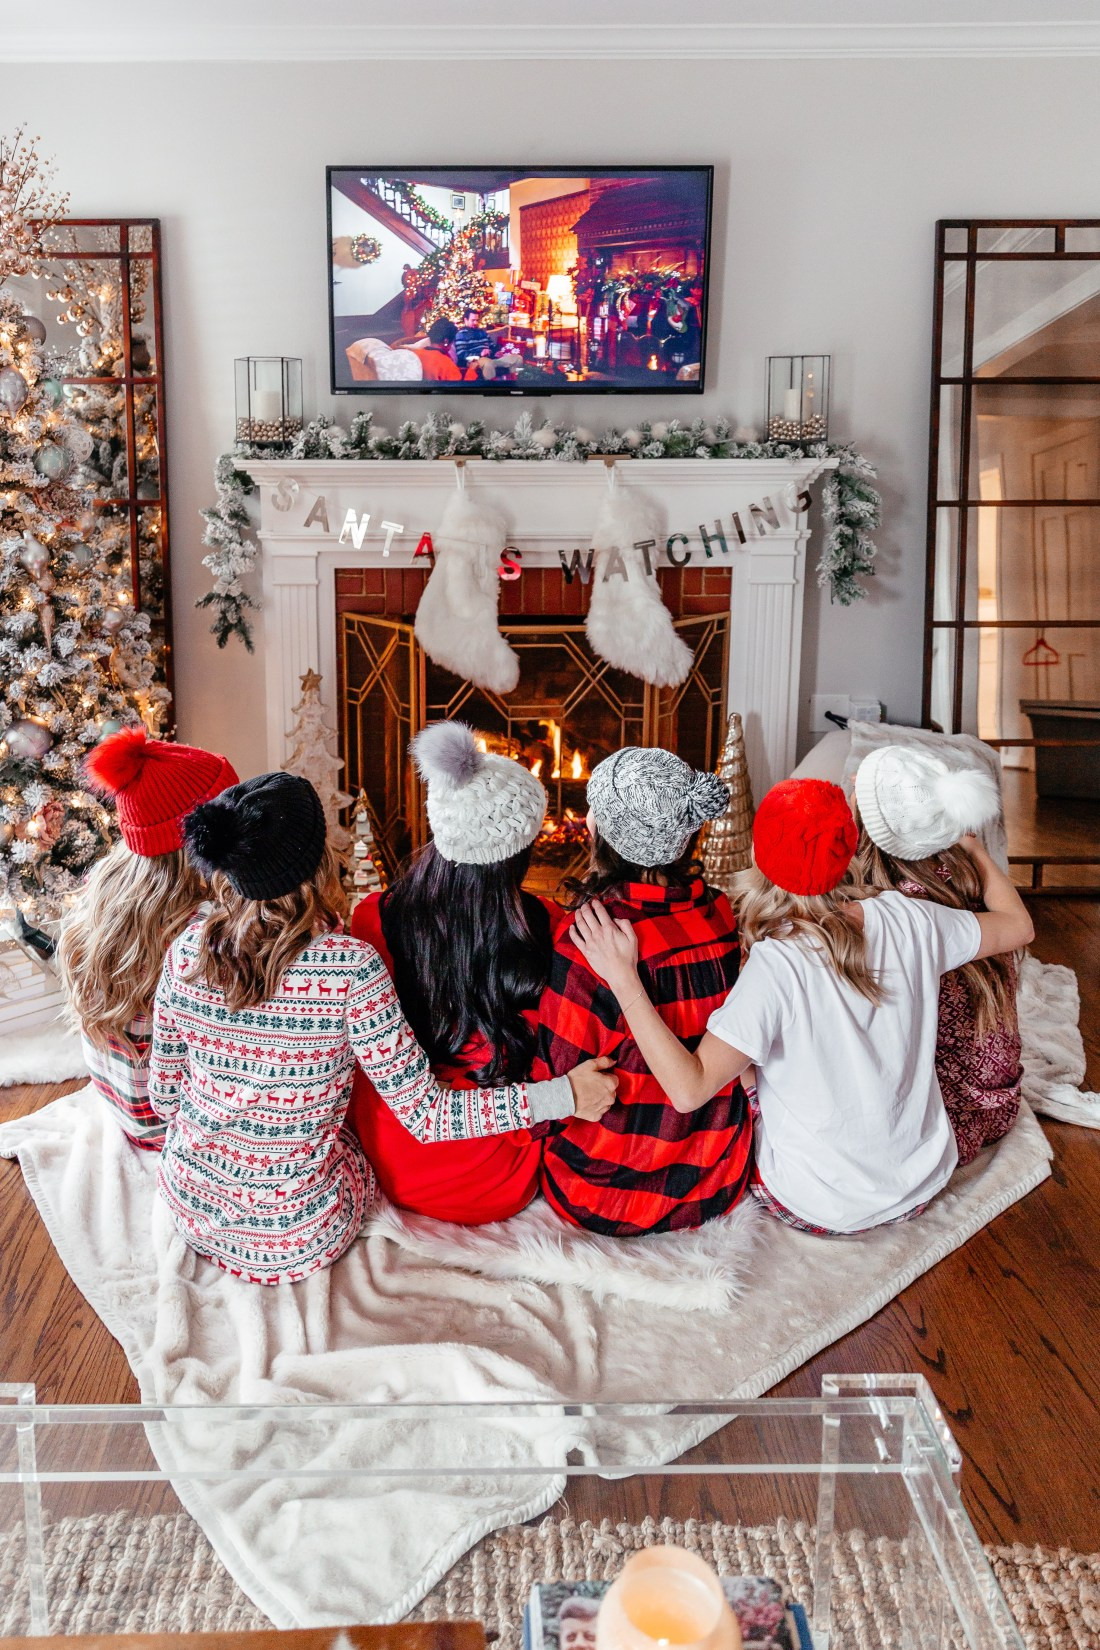 Christmas Pajama Party Ideas
 Top 100 Christmas Pajama Party Ideas For Adults